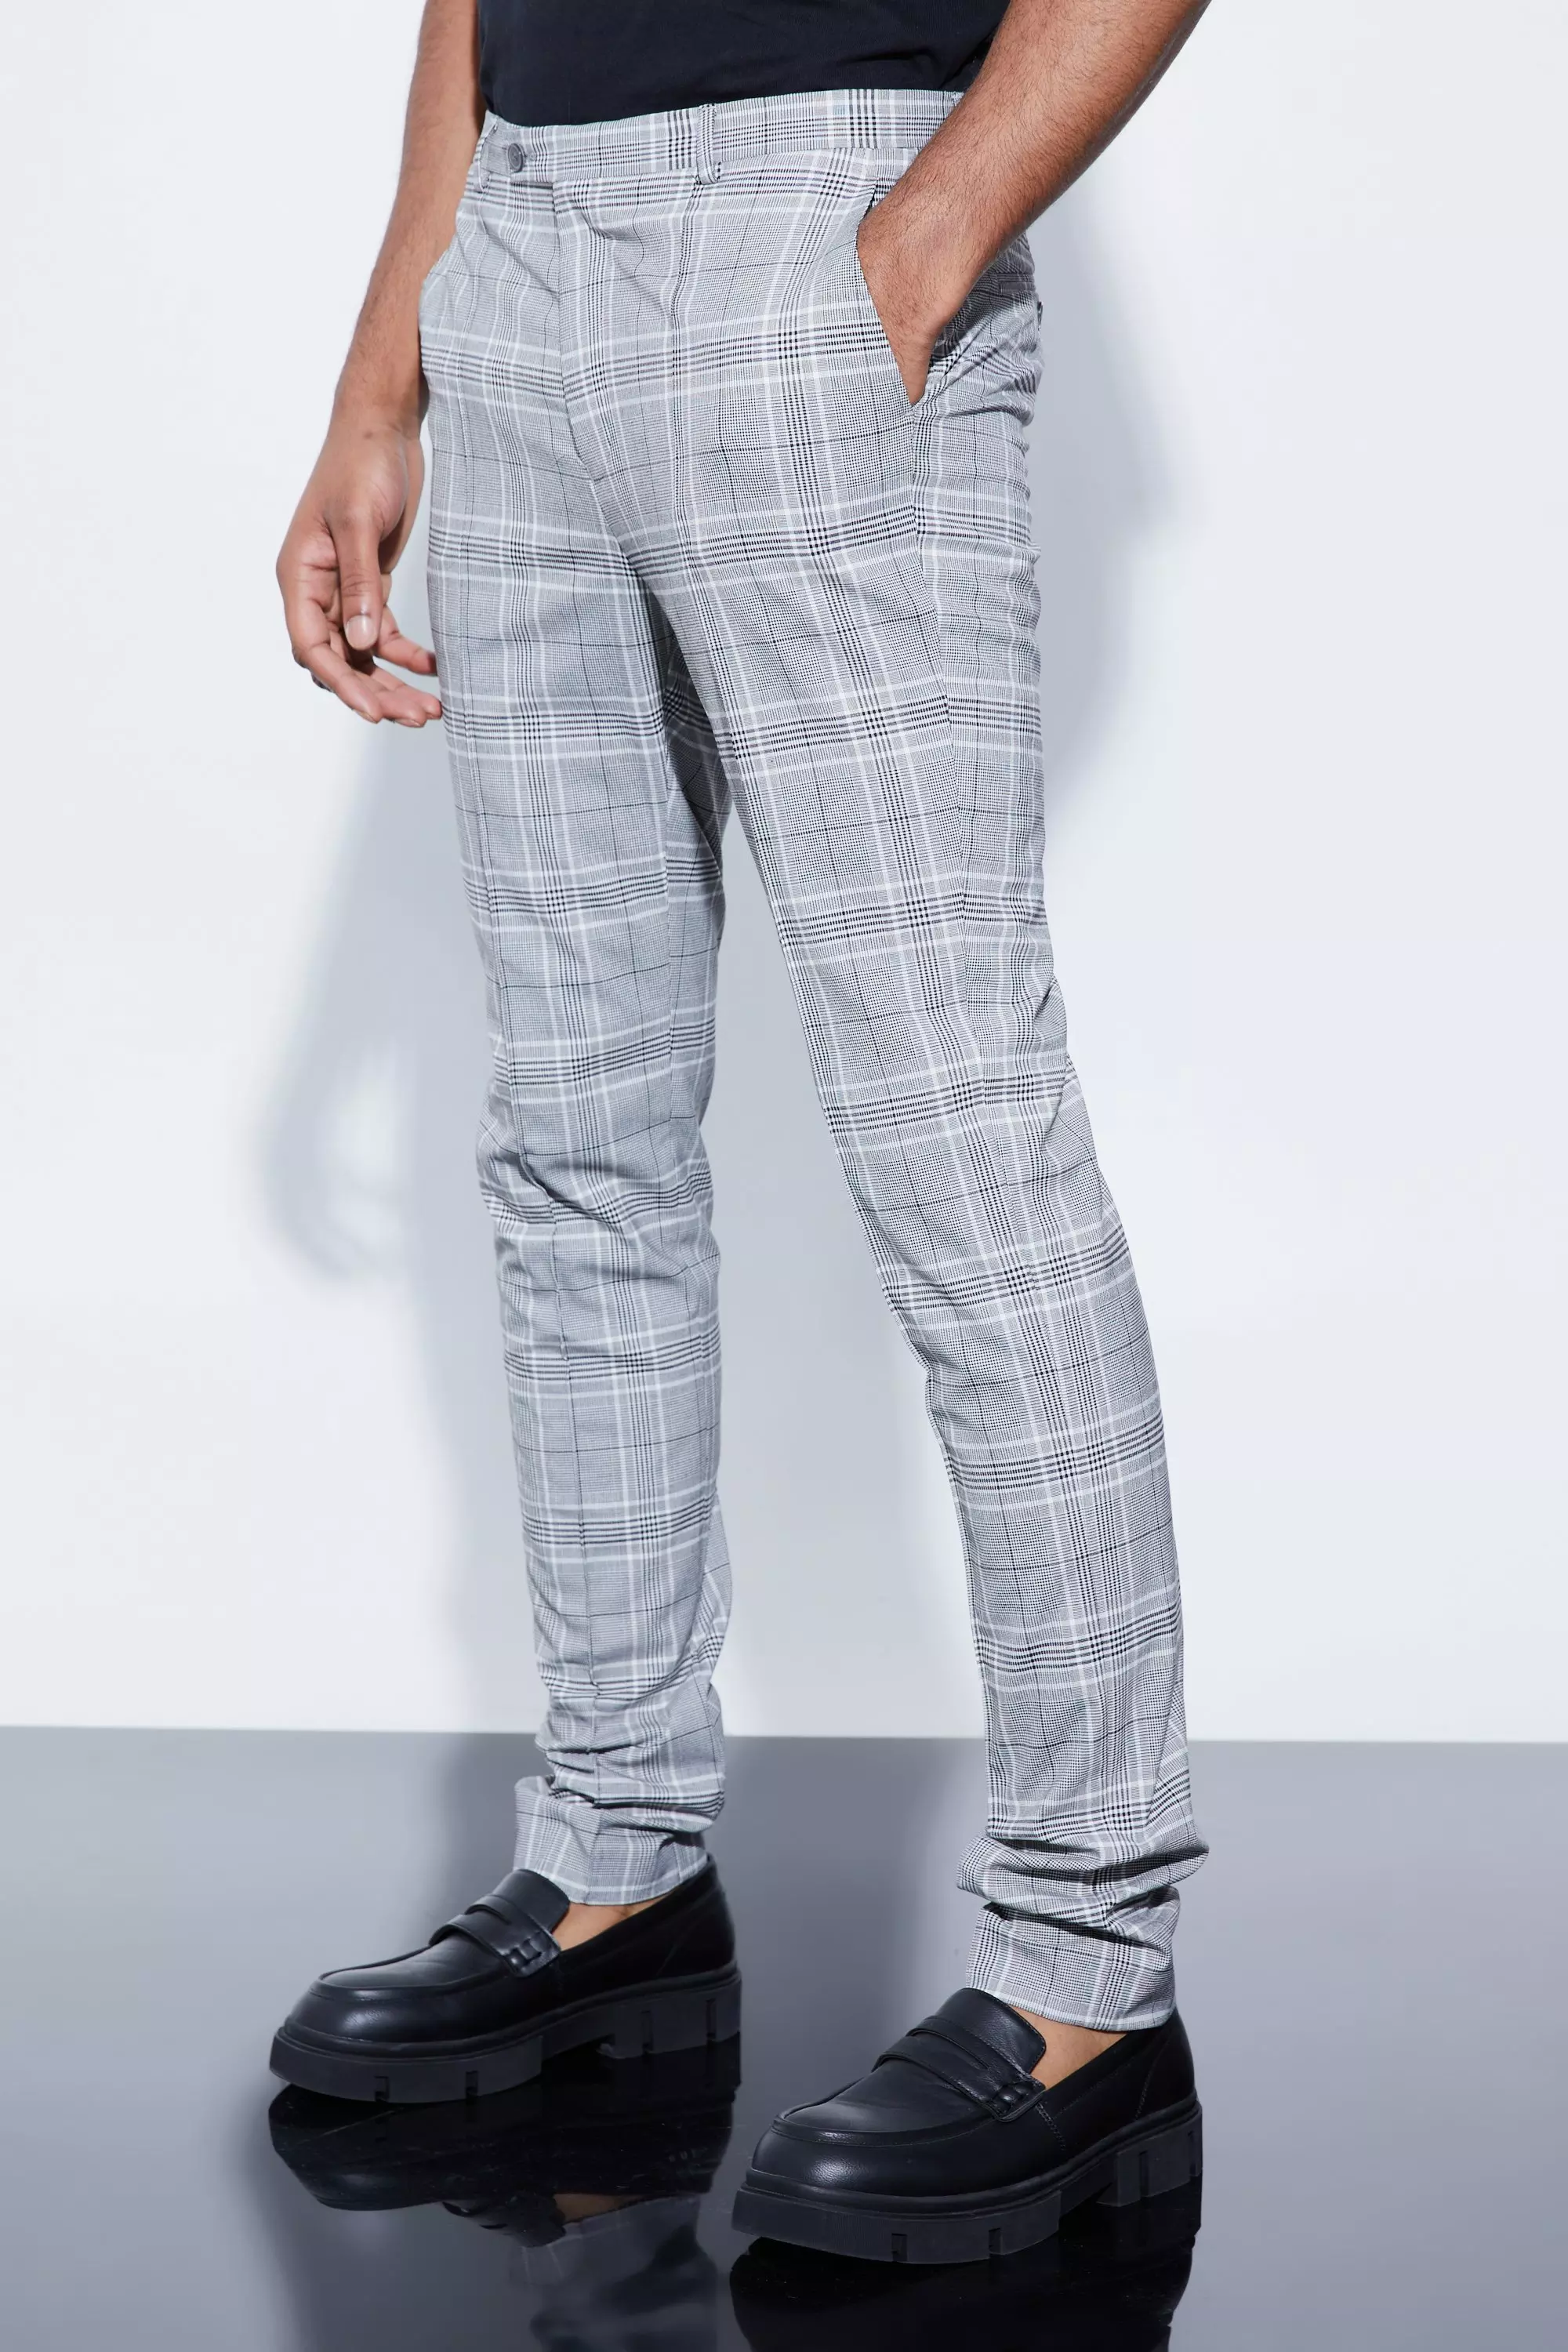 Tall Skinny Fit Black Plaid Pants With Pintuck Grey